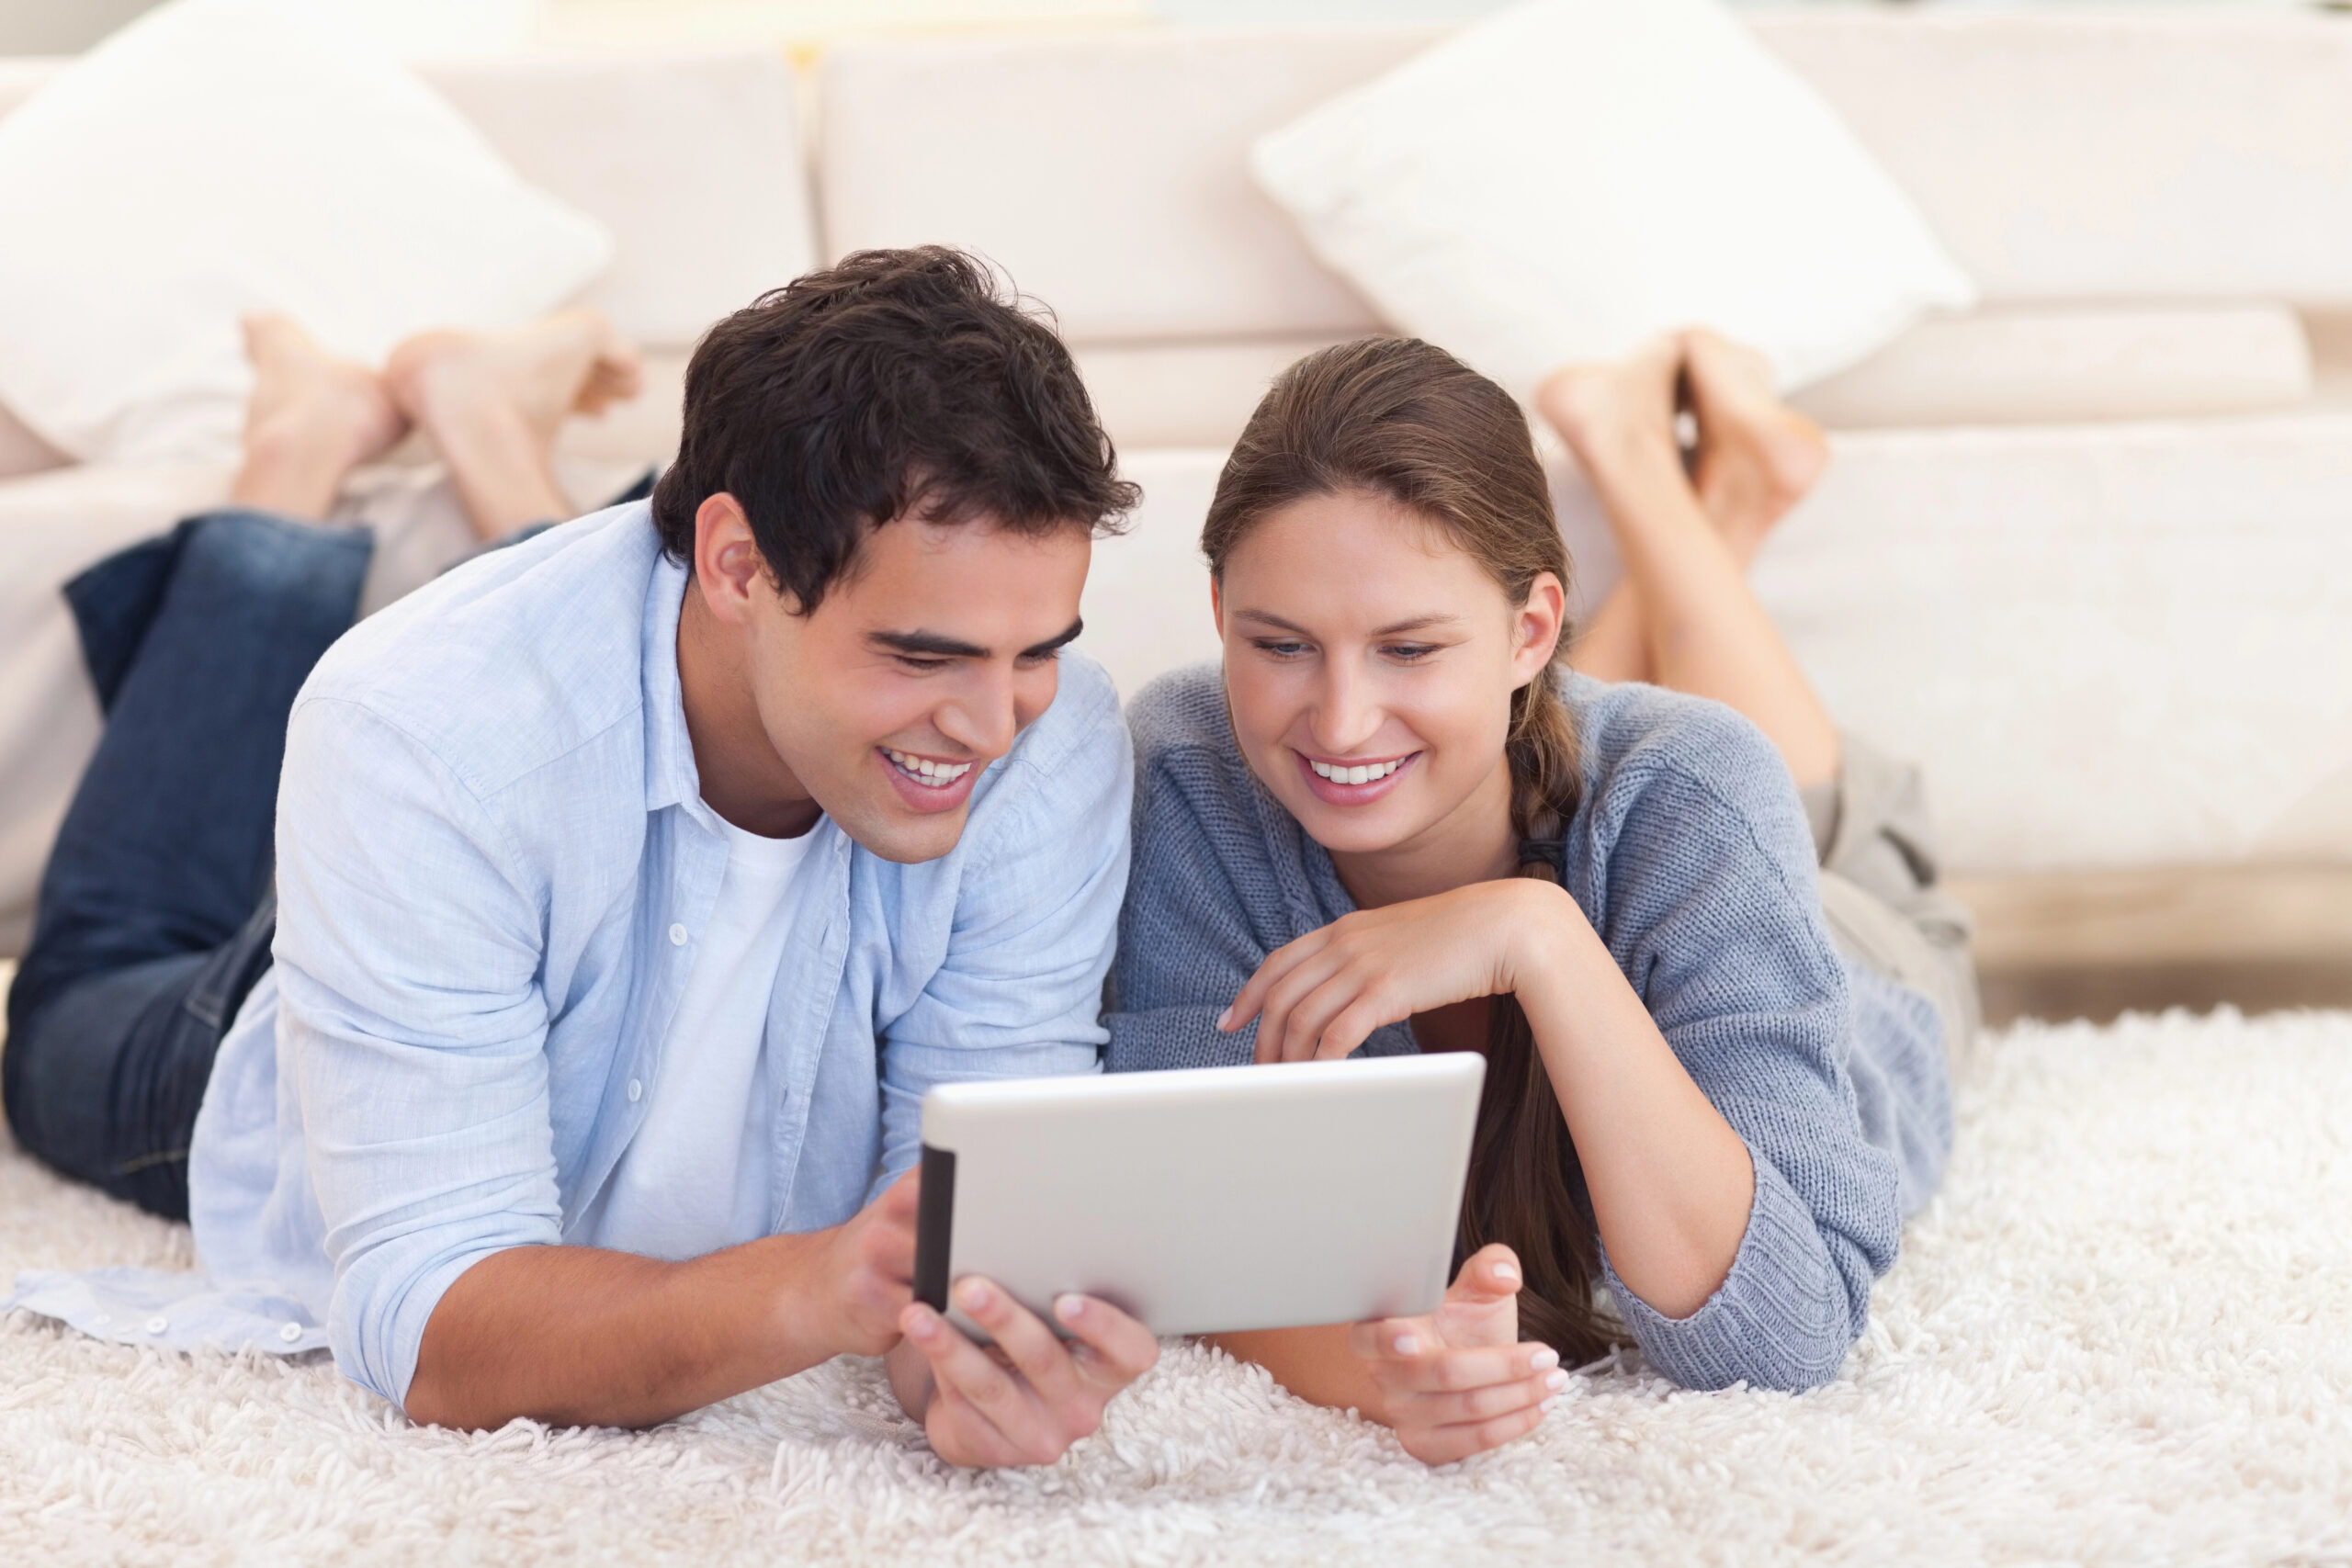 Smiling couple using a tablet computer